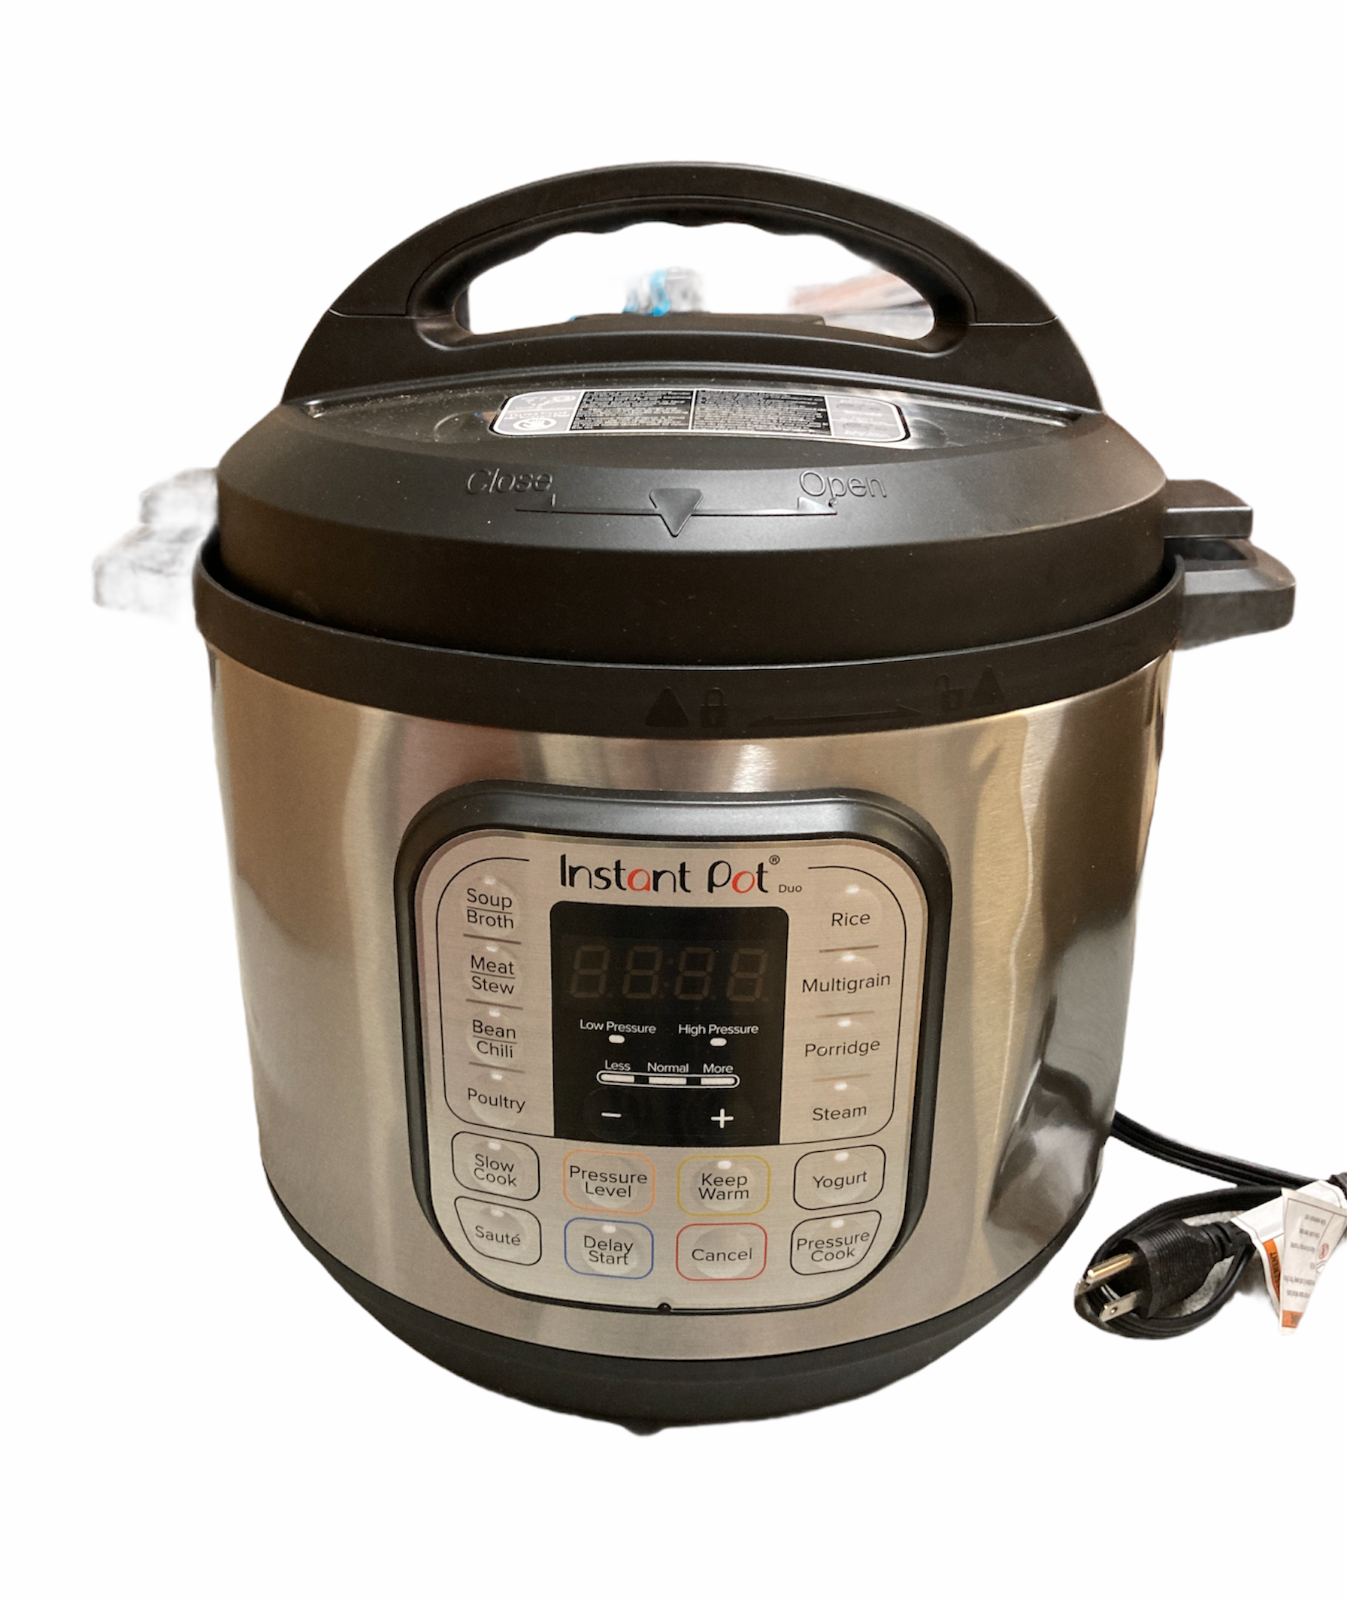 Instant Pot Duo 7-in-1 Electric Pressure Cooker, Slow, Rice, Steam, 8 Quart READ